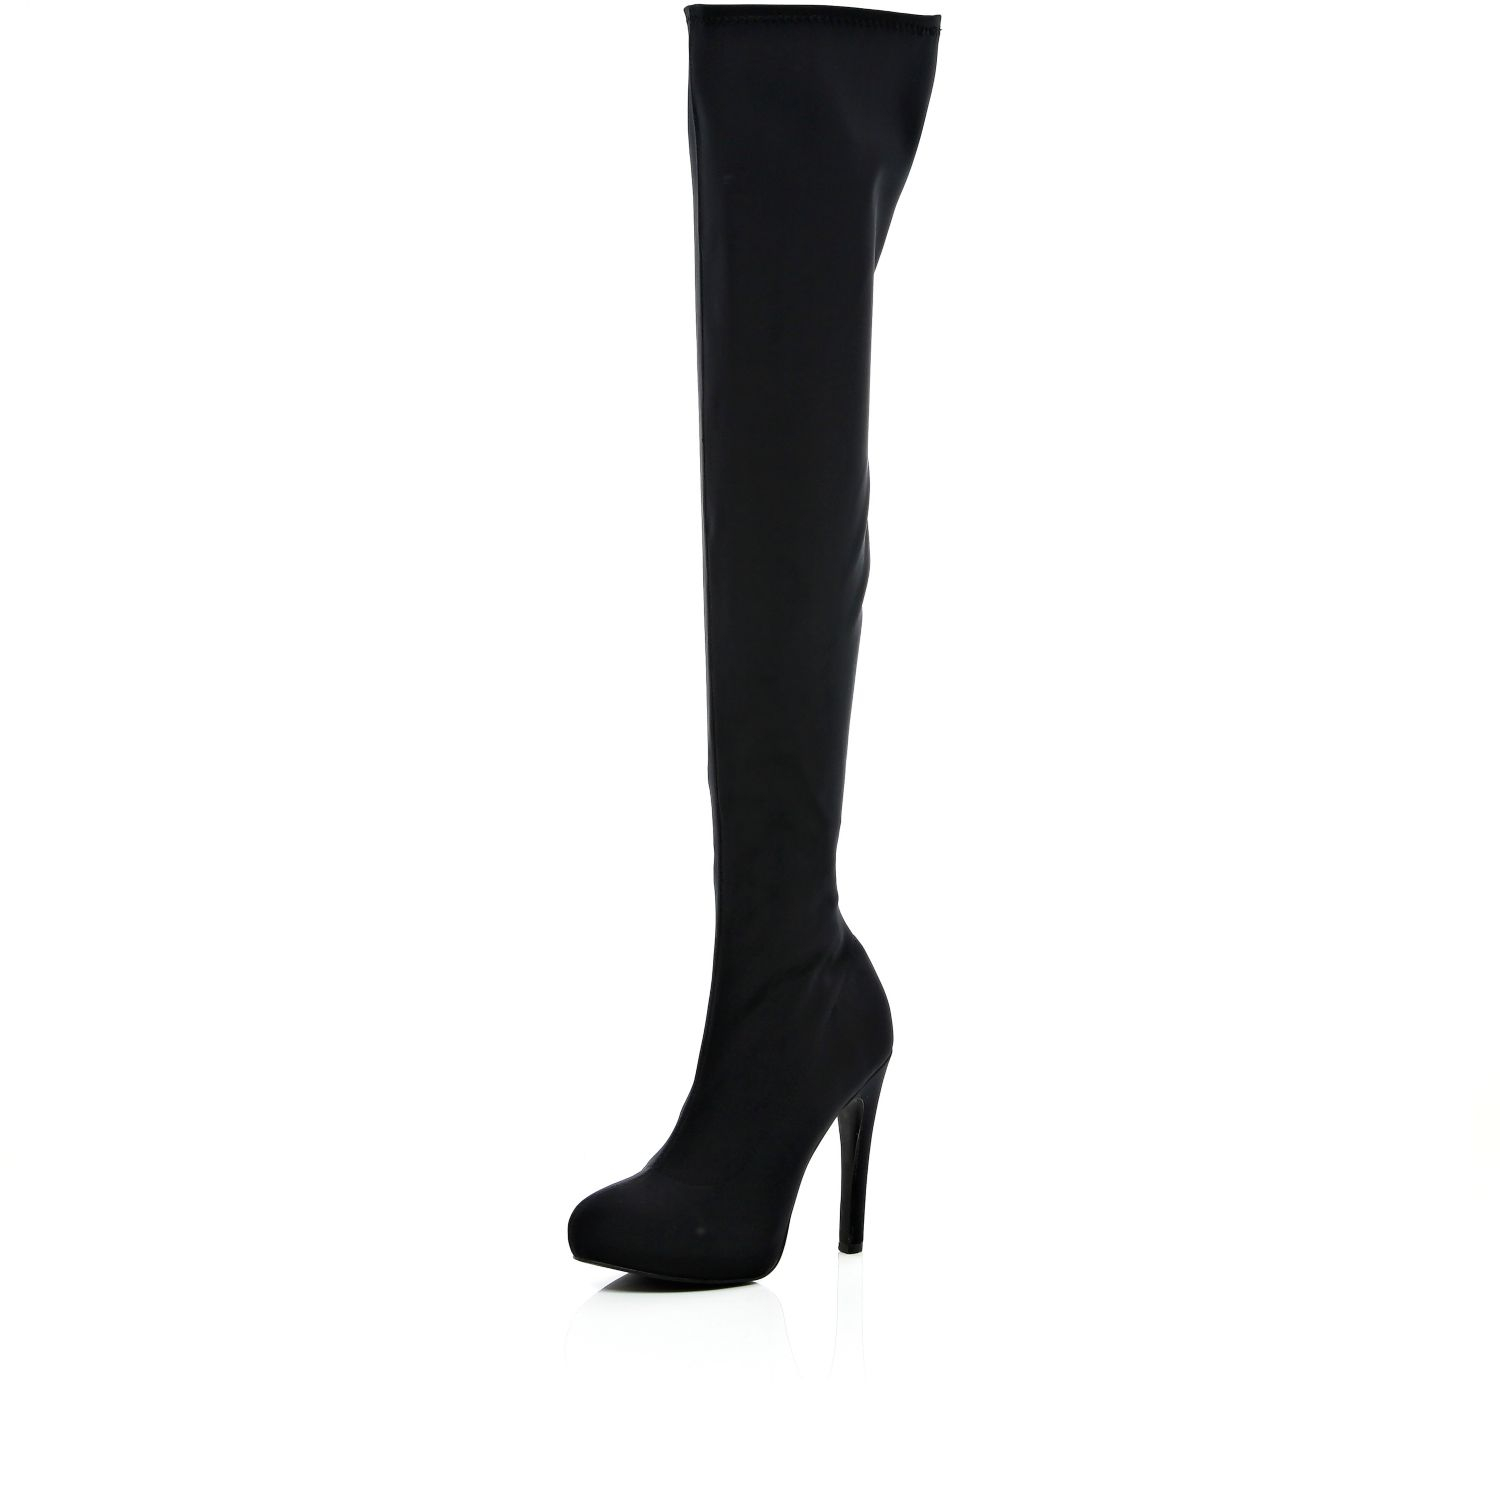 River Island Black Over The Knee Stiletto Boots in Black | Lyst